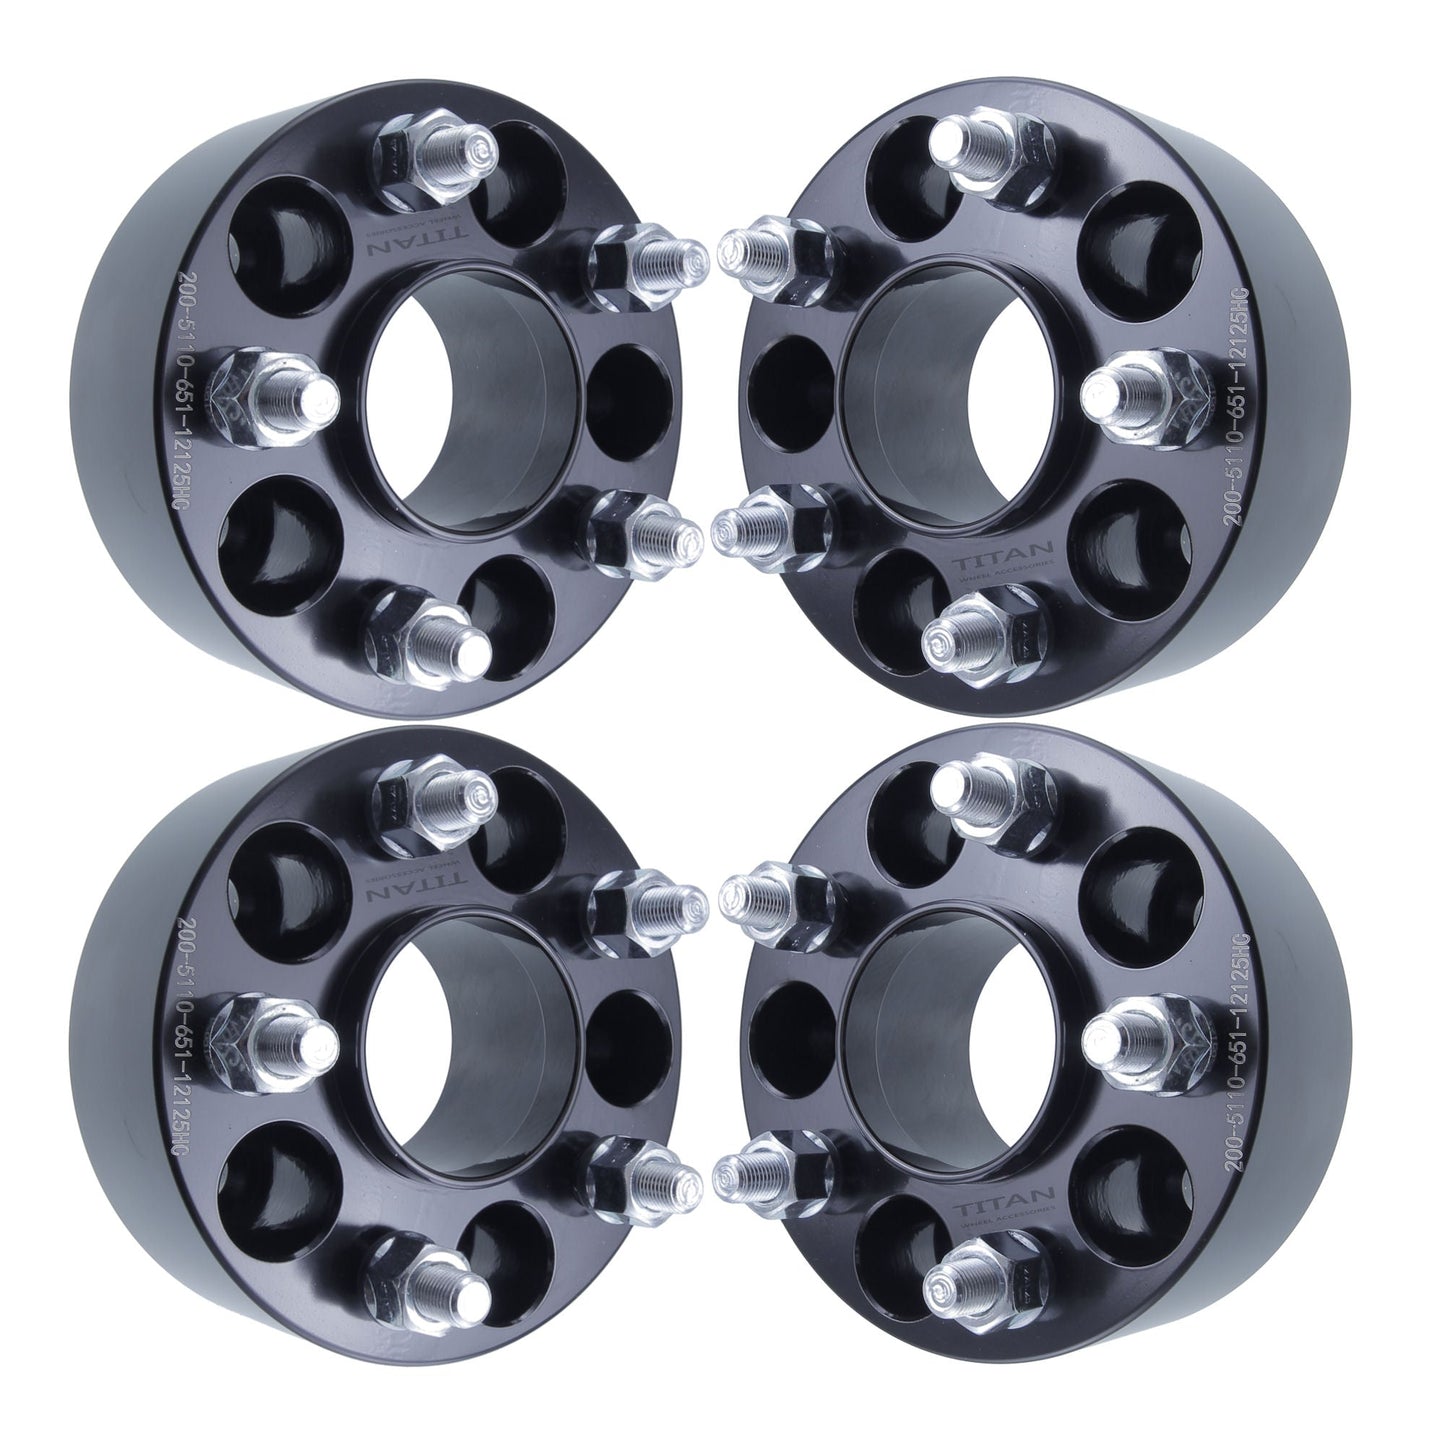 50mm (2") Titan Wheel Spacers for Jeep Cherokee Renegade | 5x110 | 65.1 Hubcentric |12x1.25 Studs | Set of 4 | Titan Wheel Accessories